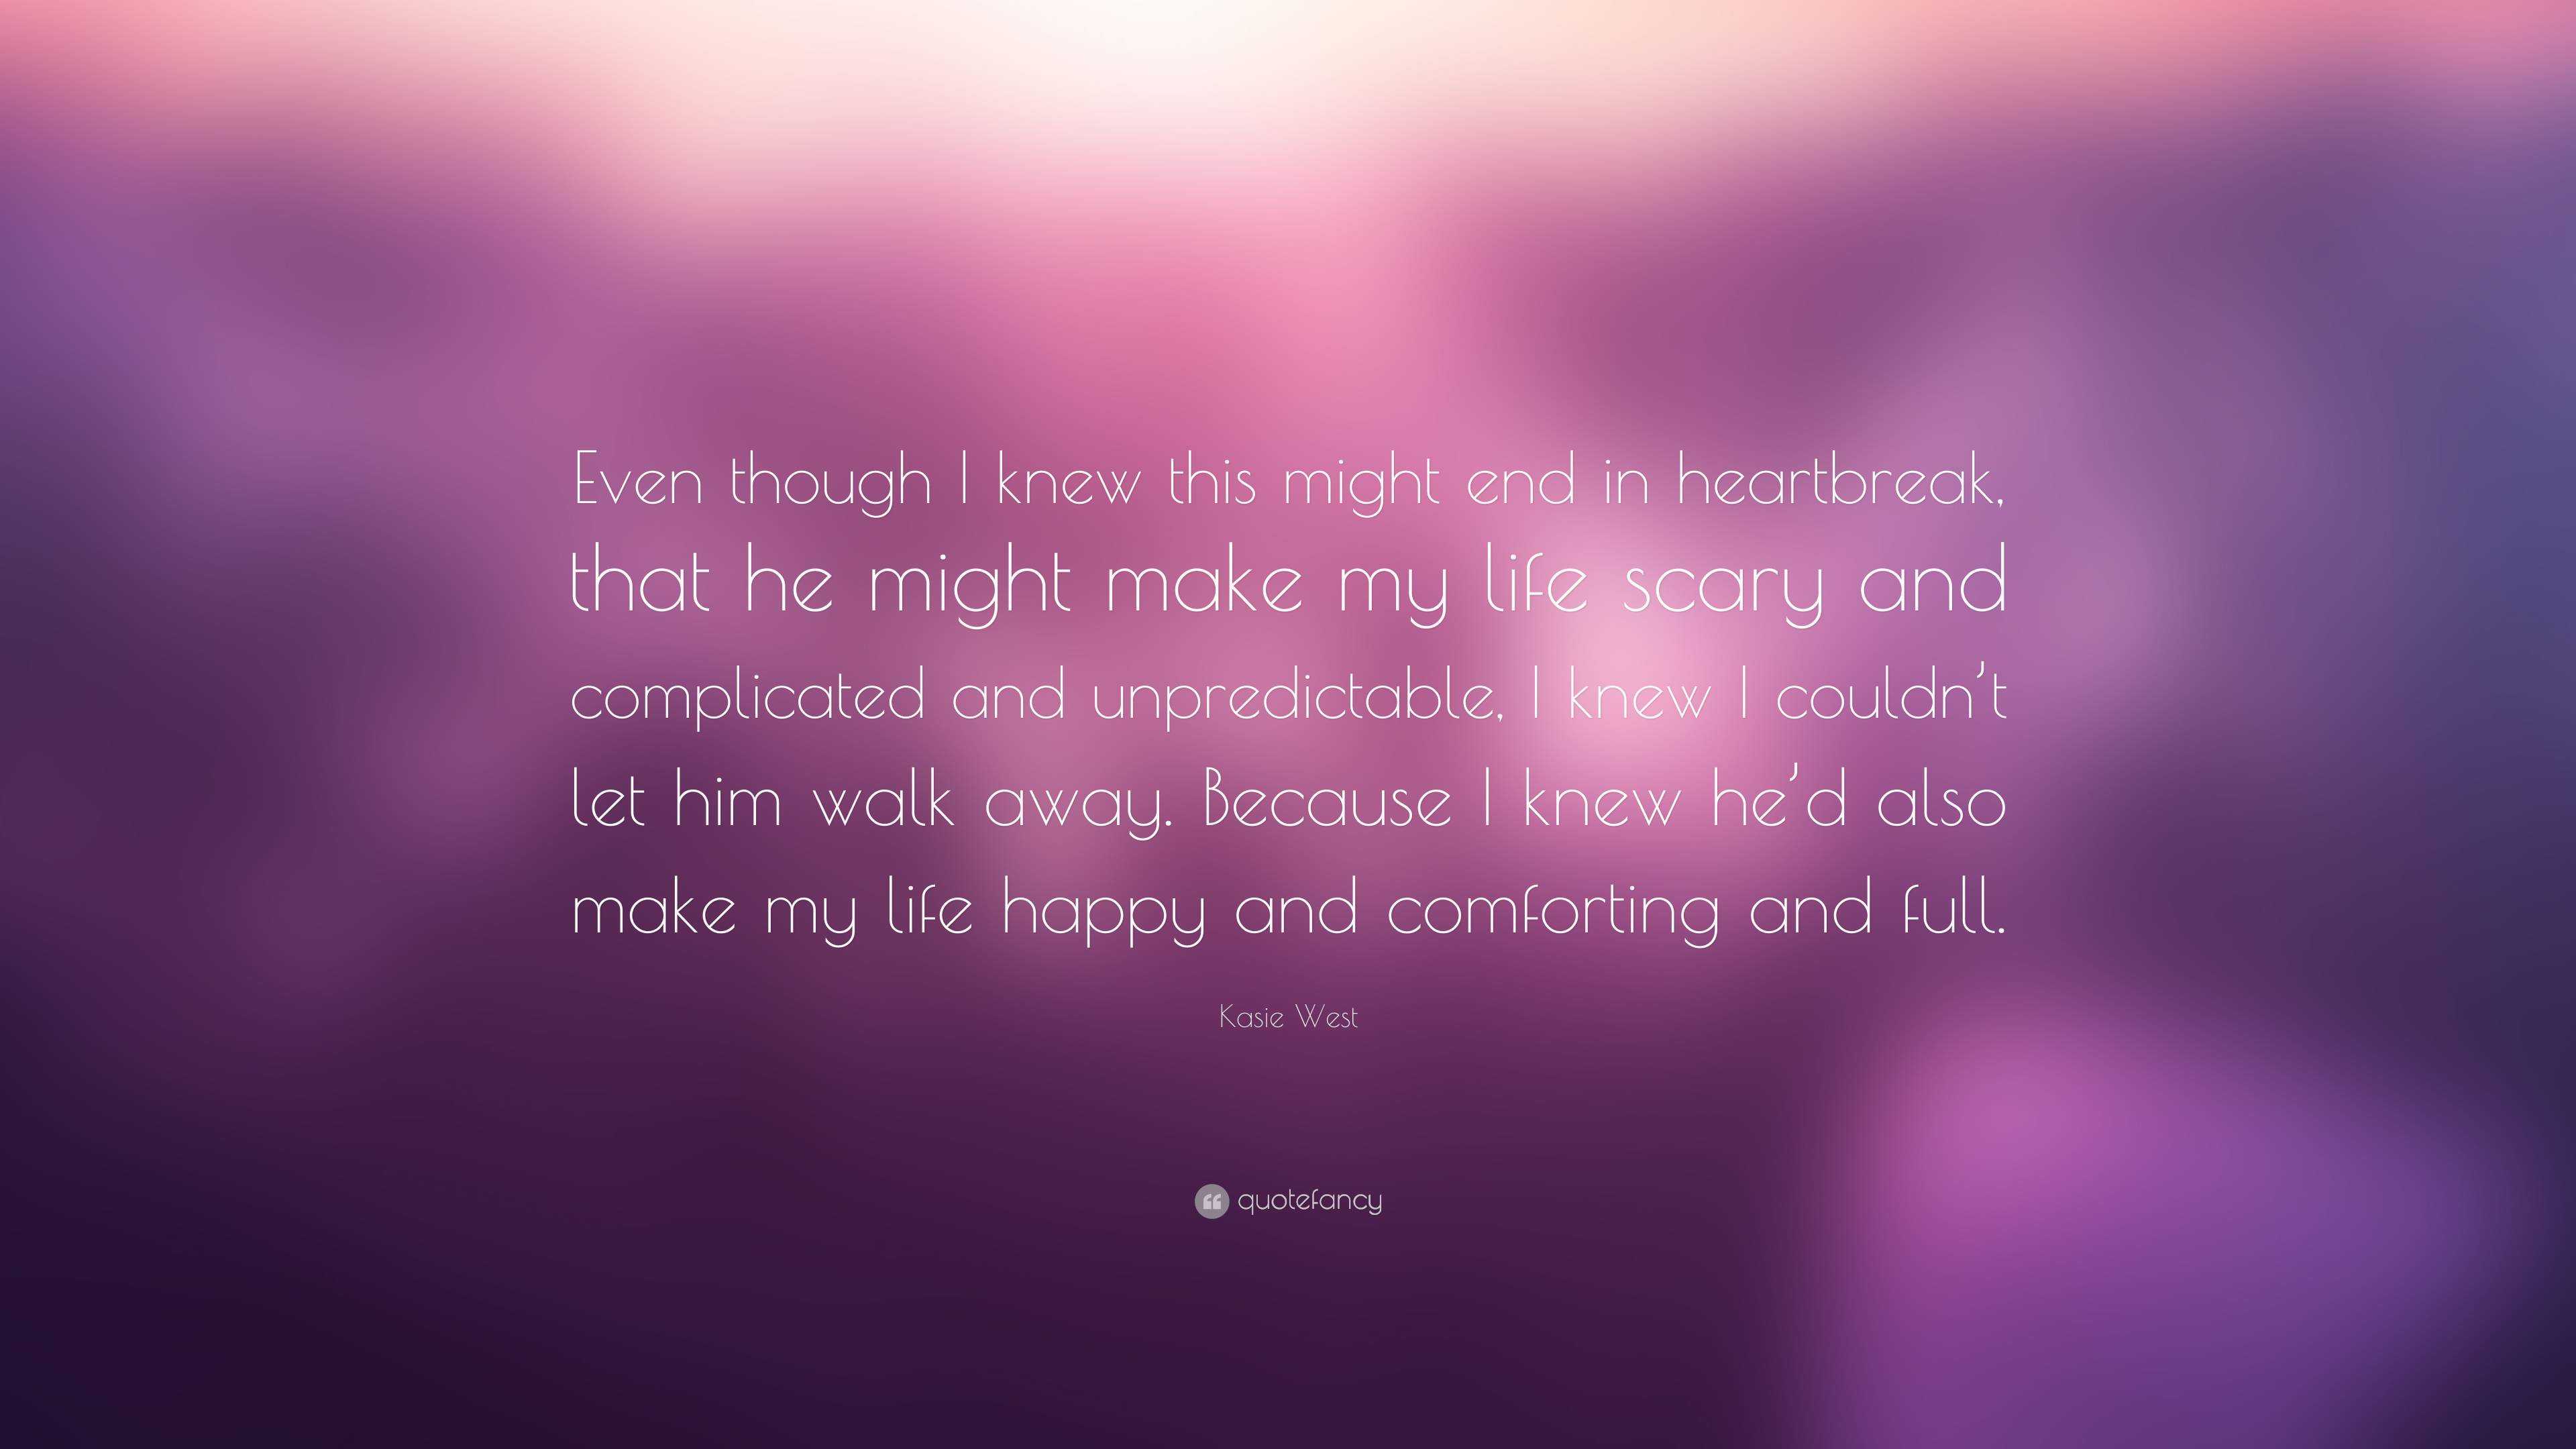 heartbreak quotes and sayings for him